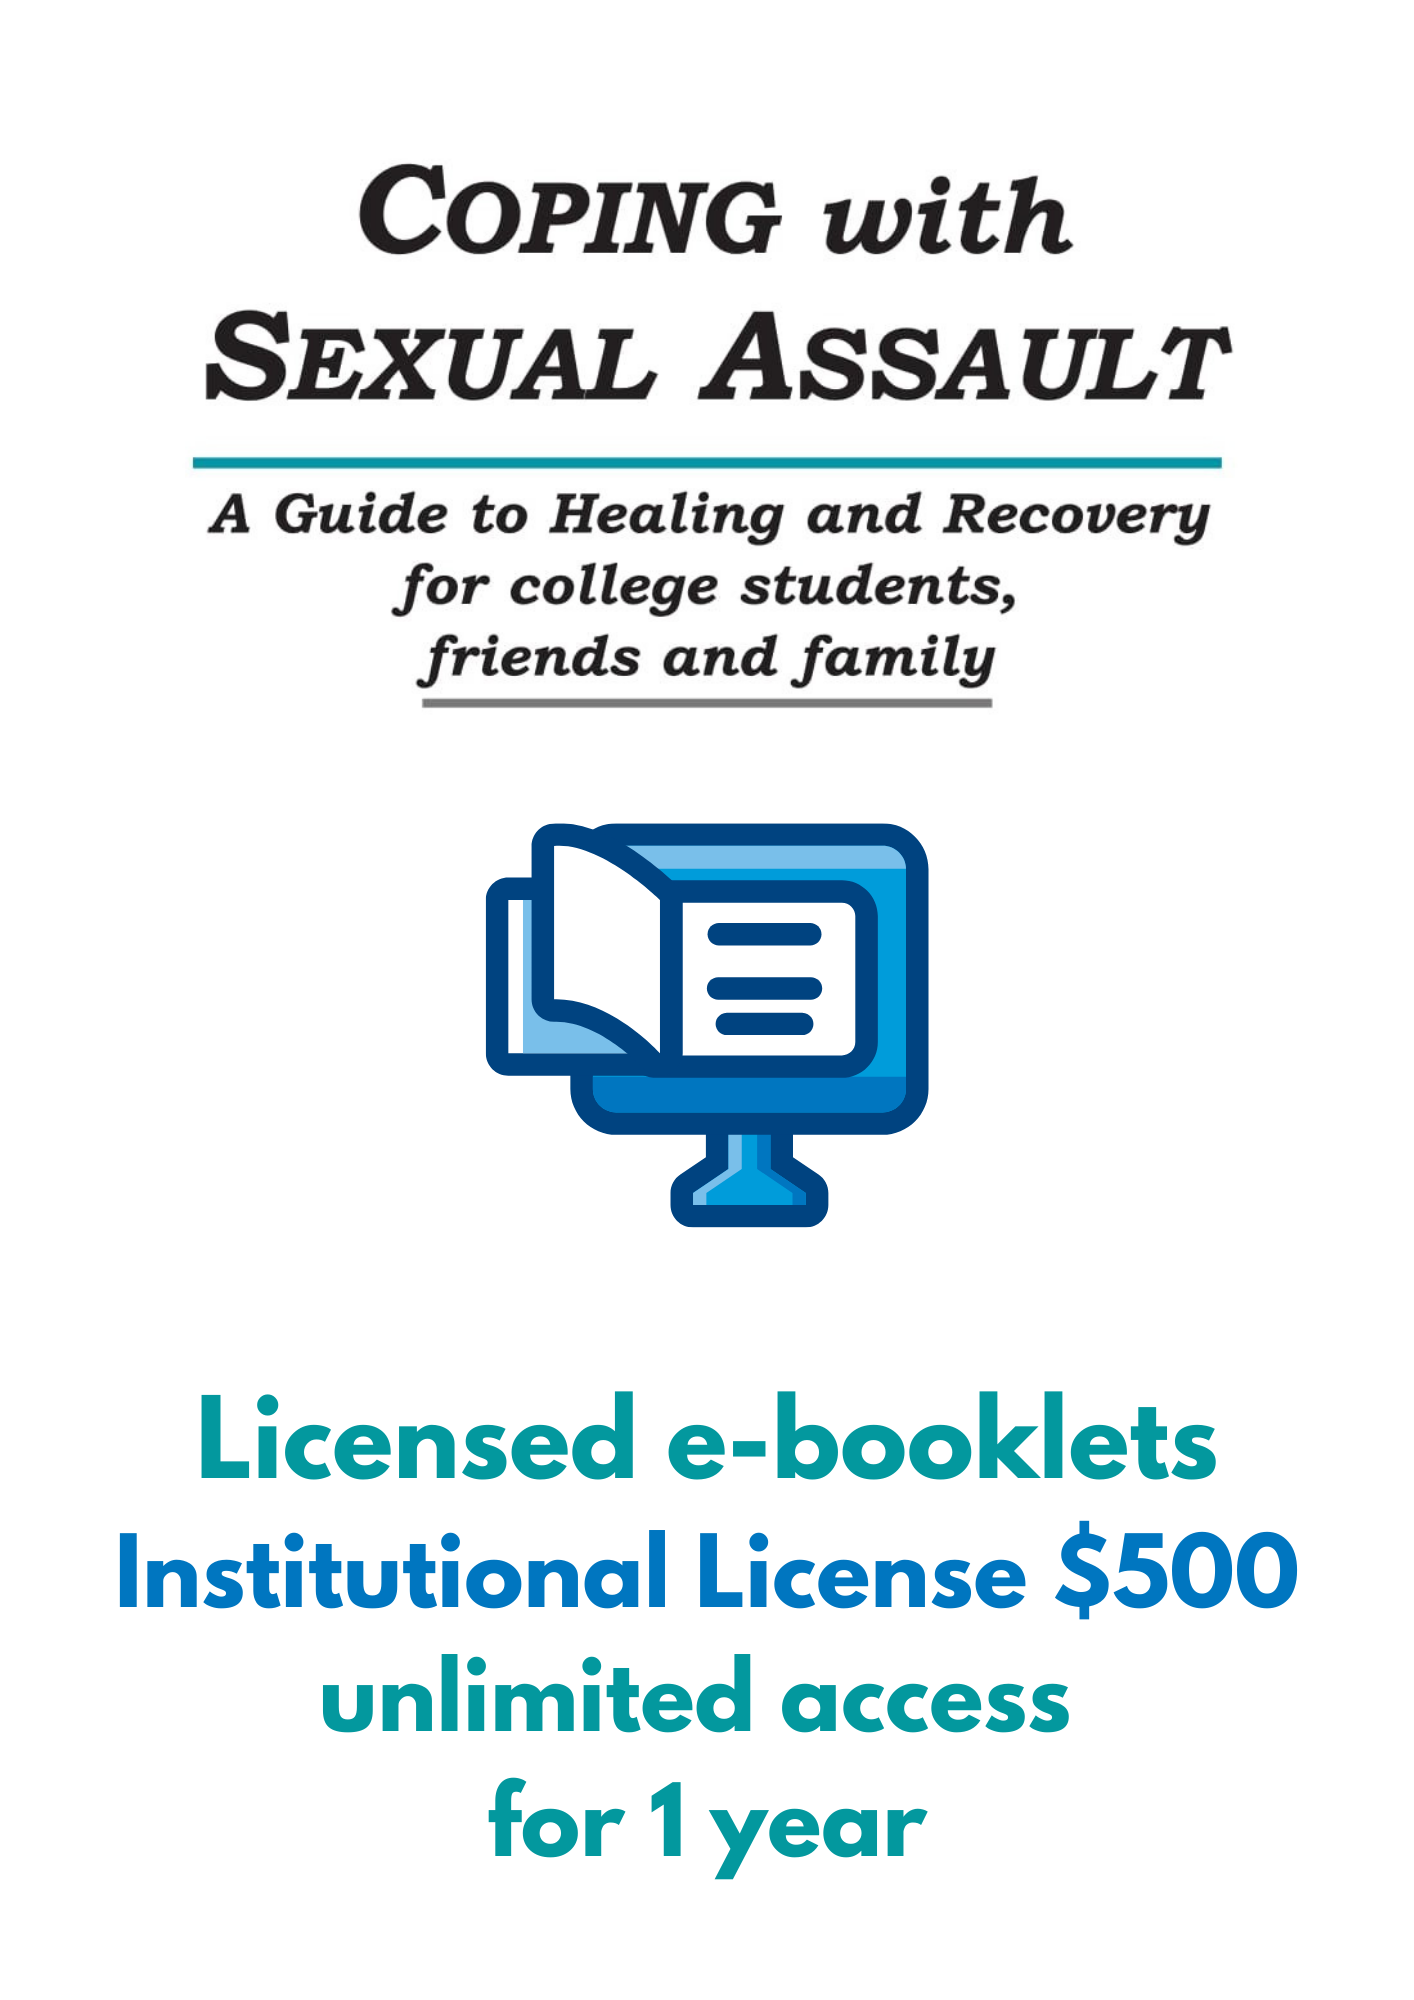 E-booklet Institutional License: Coping with Sexual Assault: A Guide for College Students